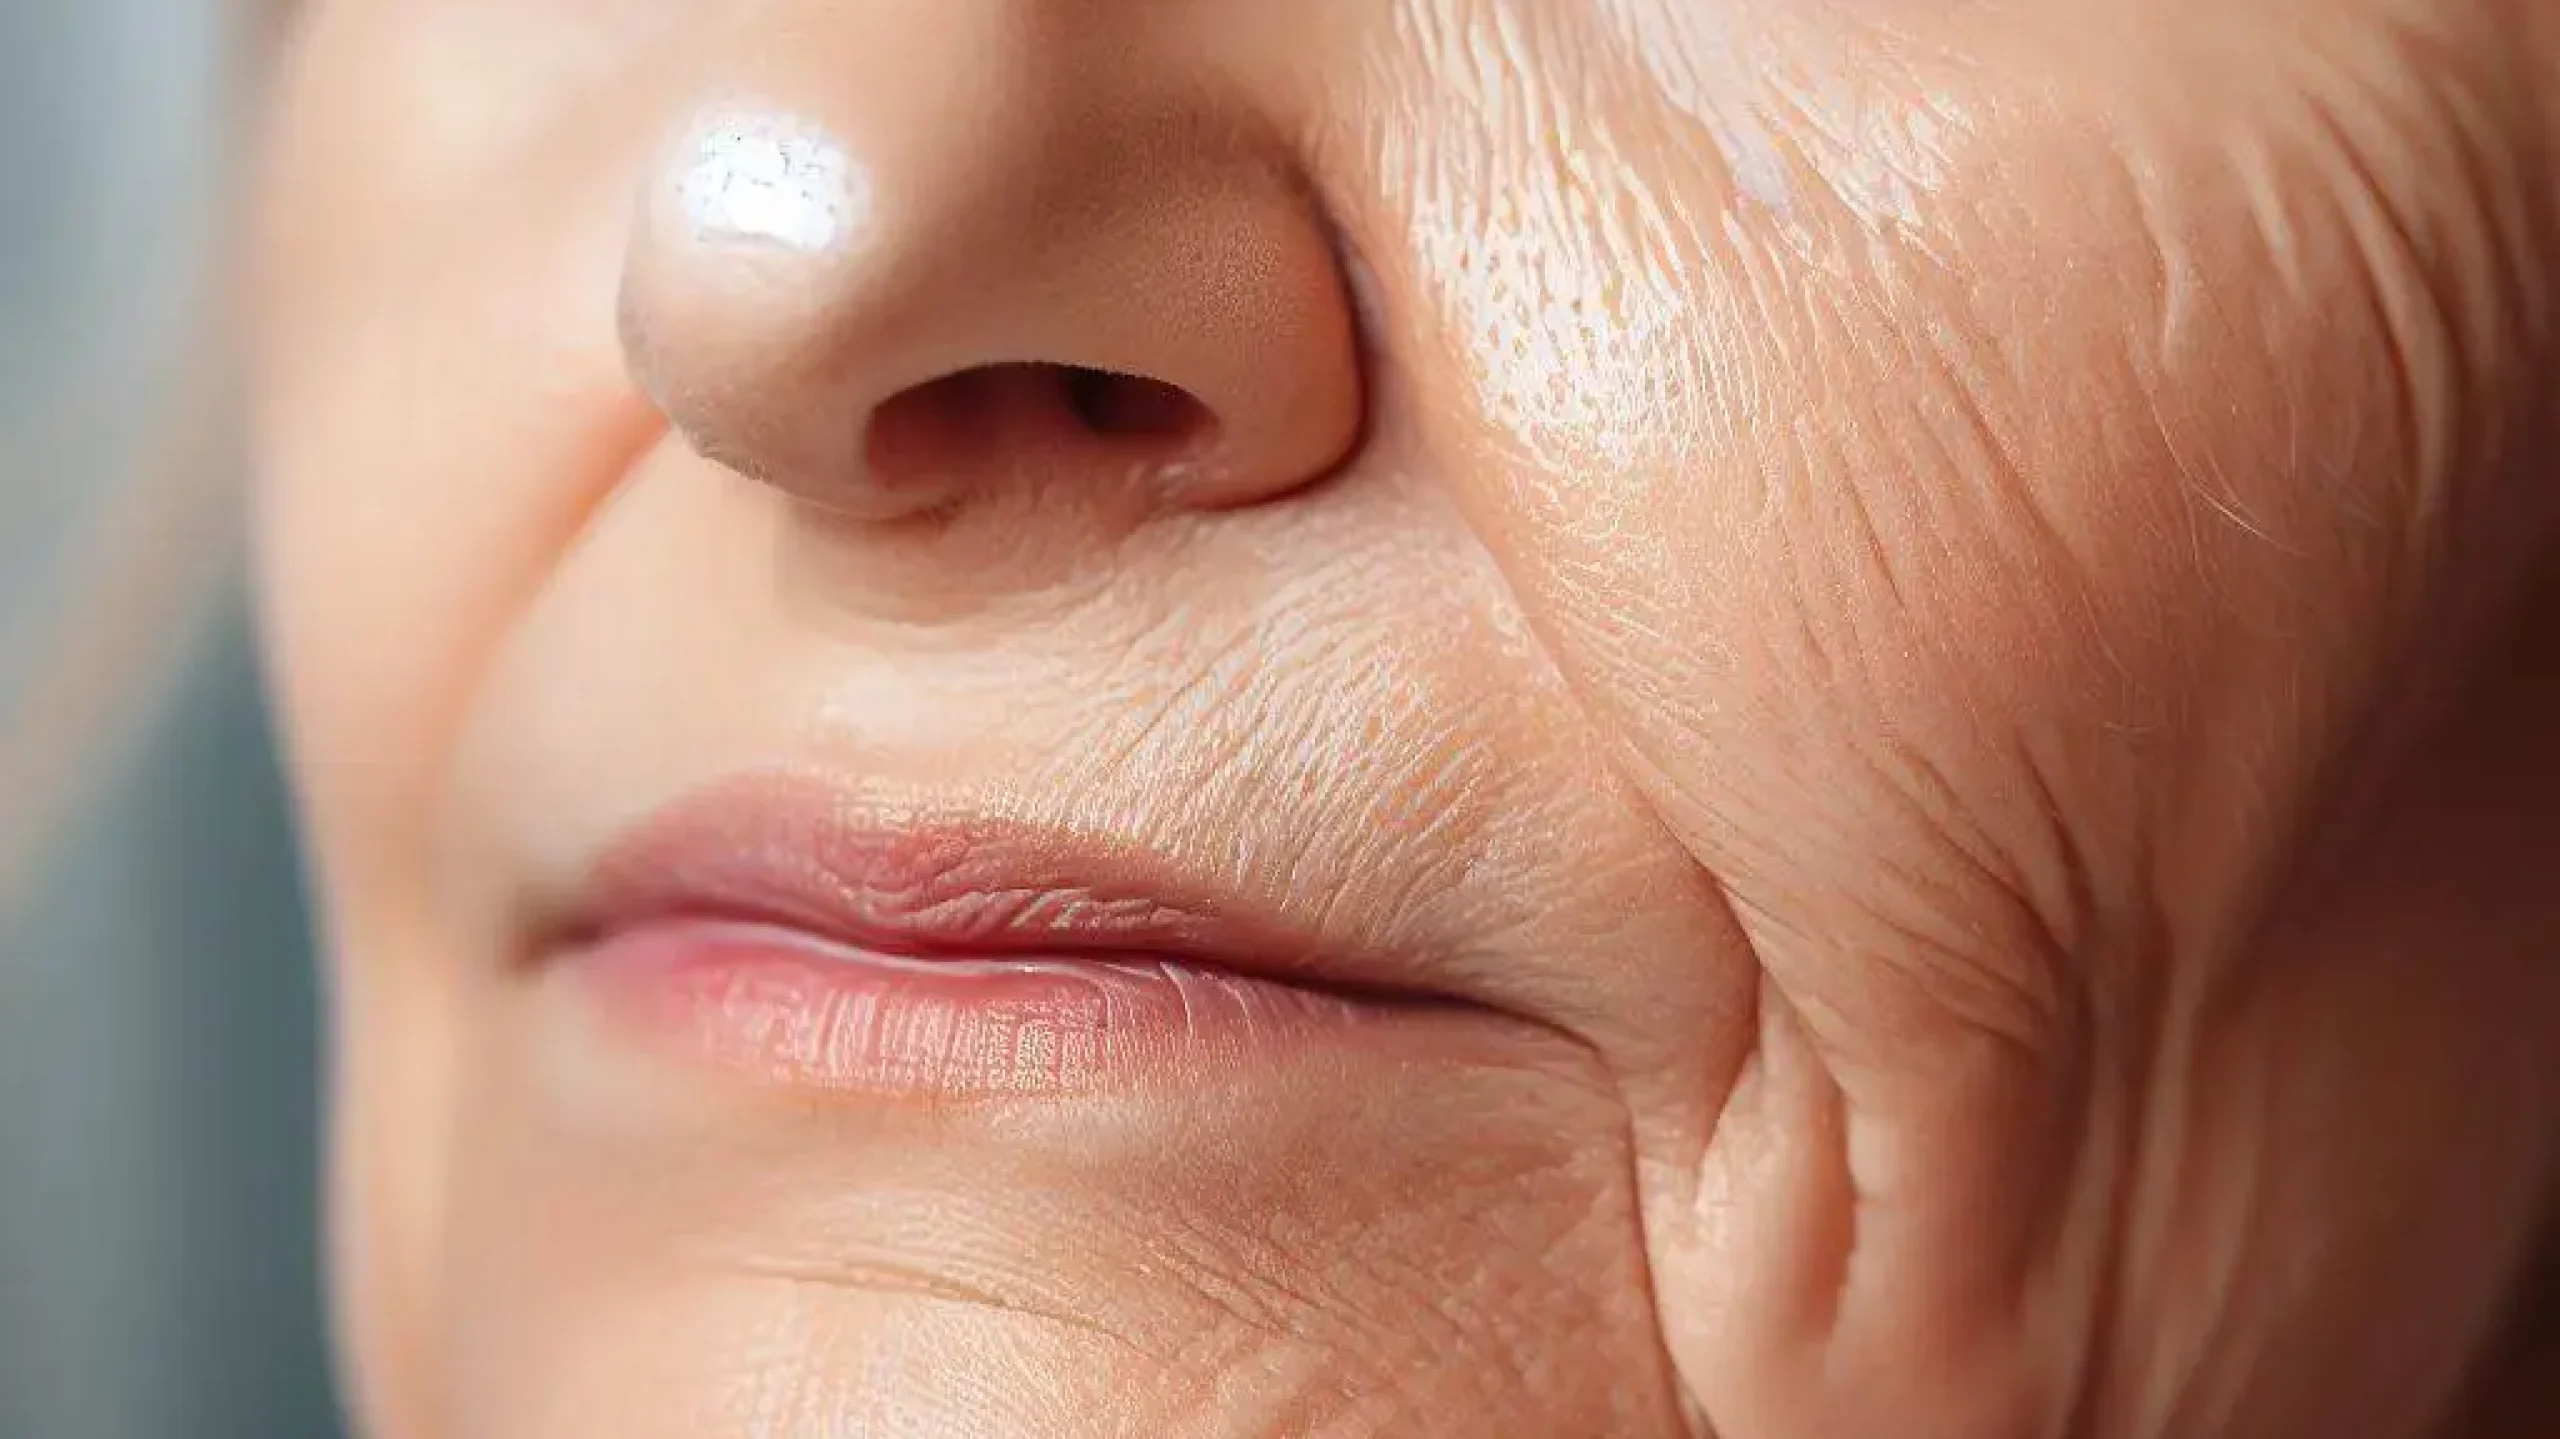 how to get rid of jowls